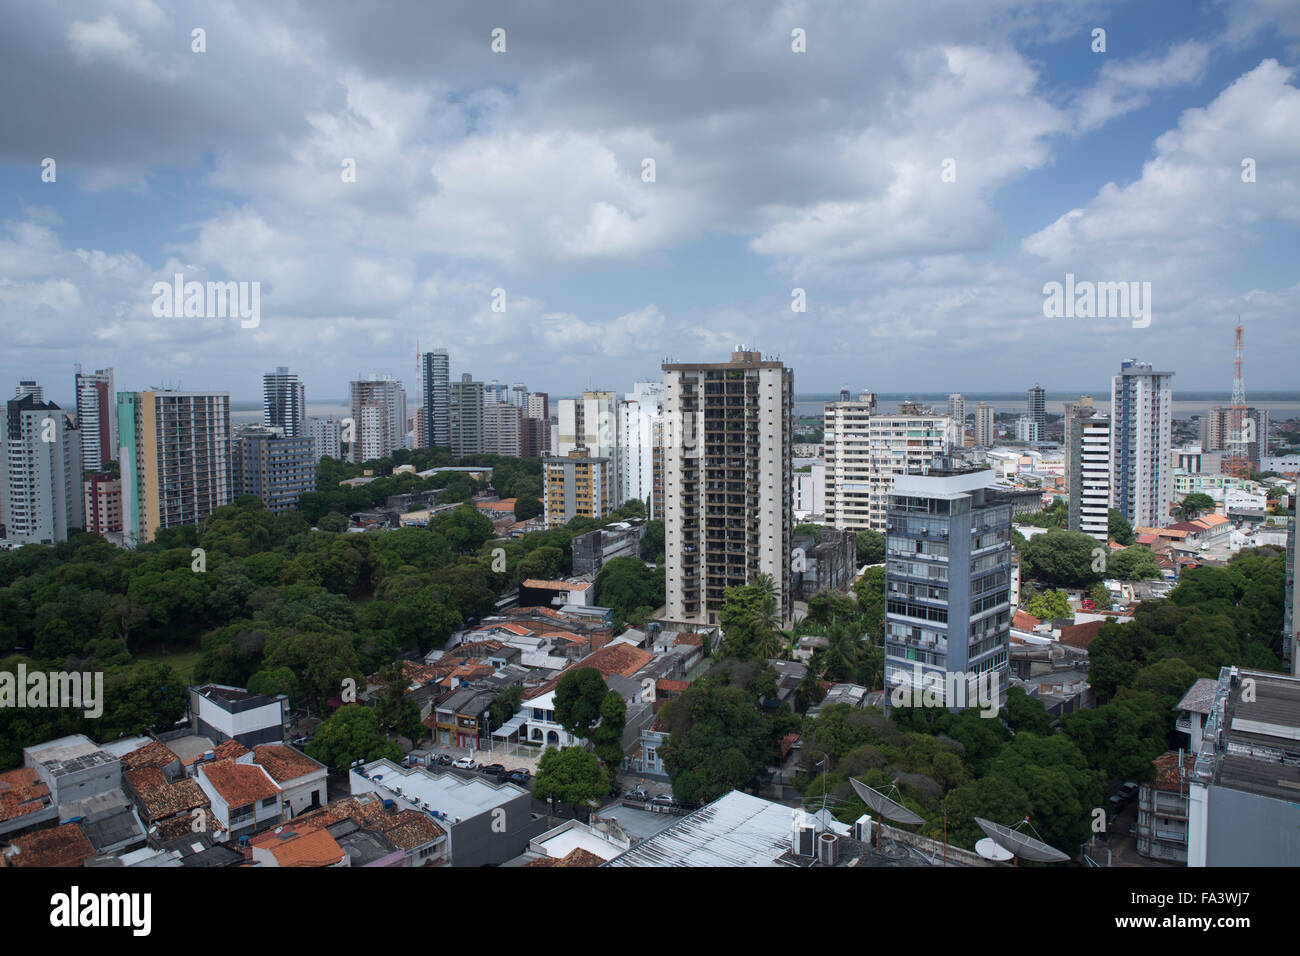 General view of the Belem city center skyline, Para state in the Brazilian Amazon Stock Photo